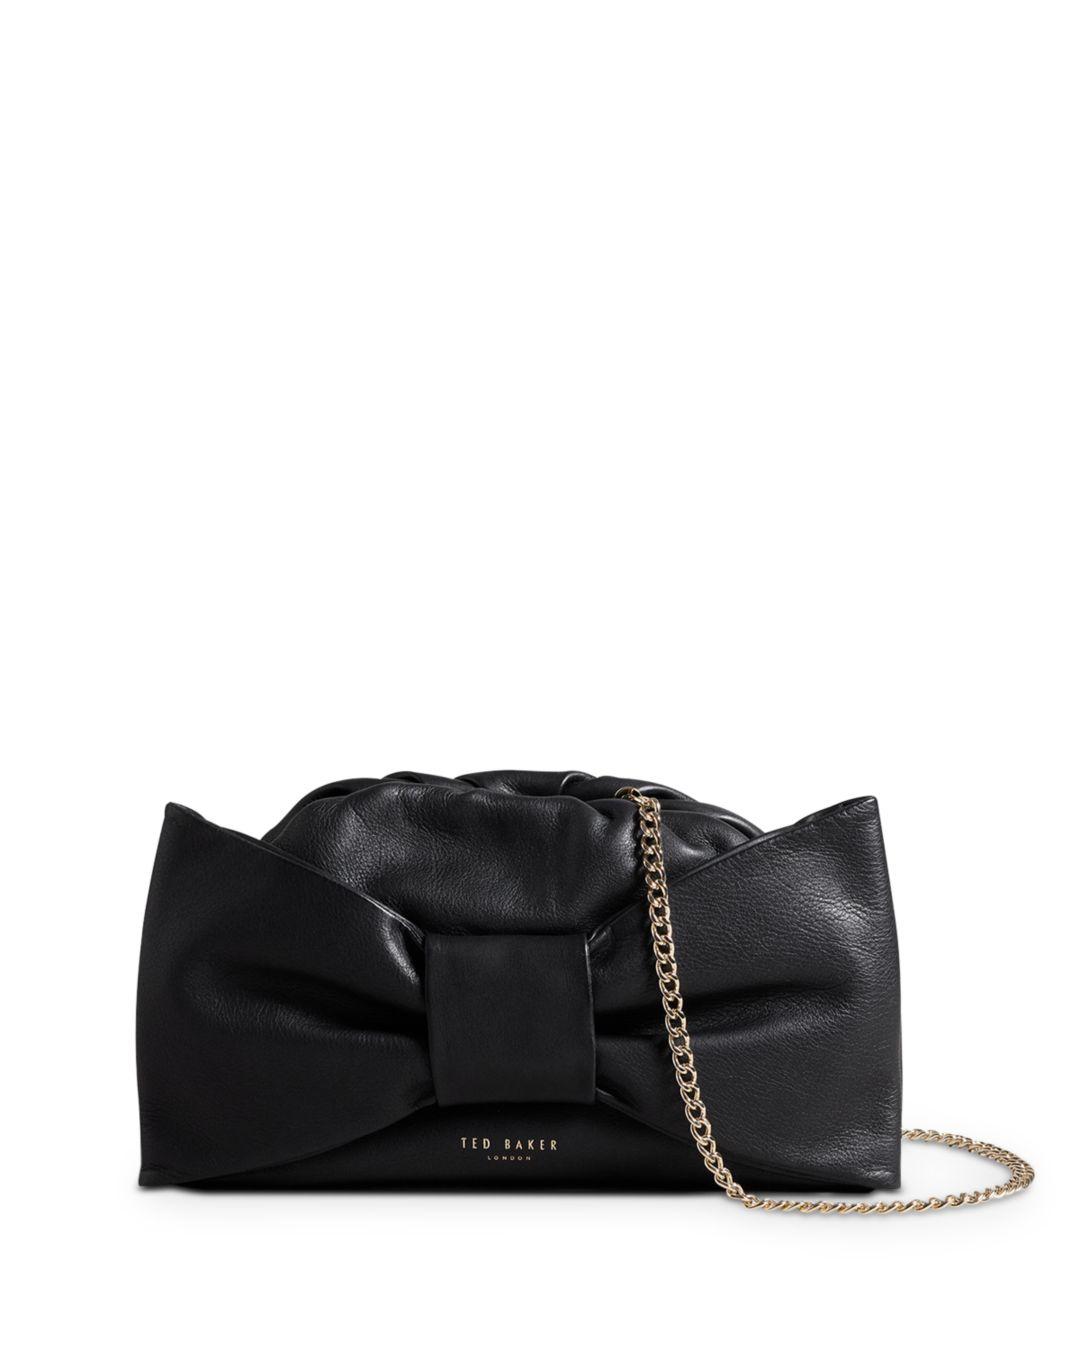 Ted Baker Niasa Bow Detail Leather Clutch in Black | Lyst